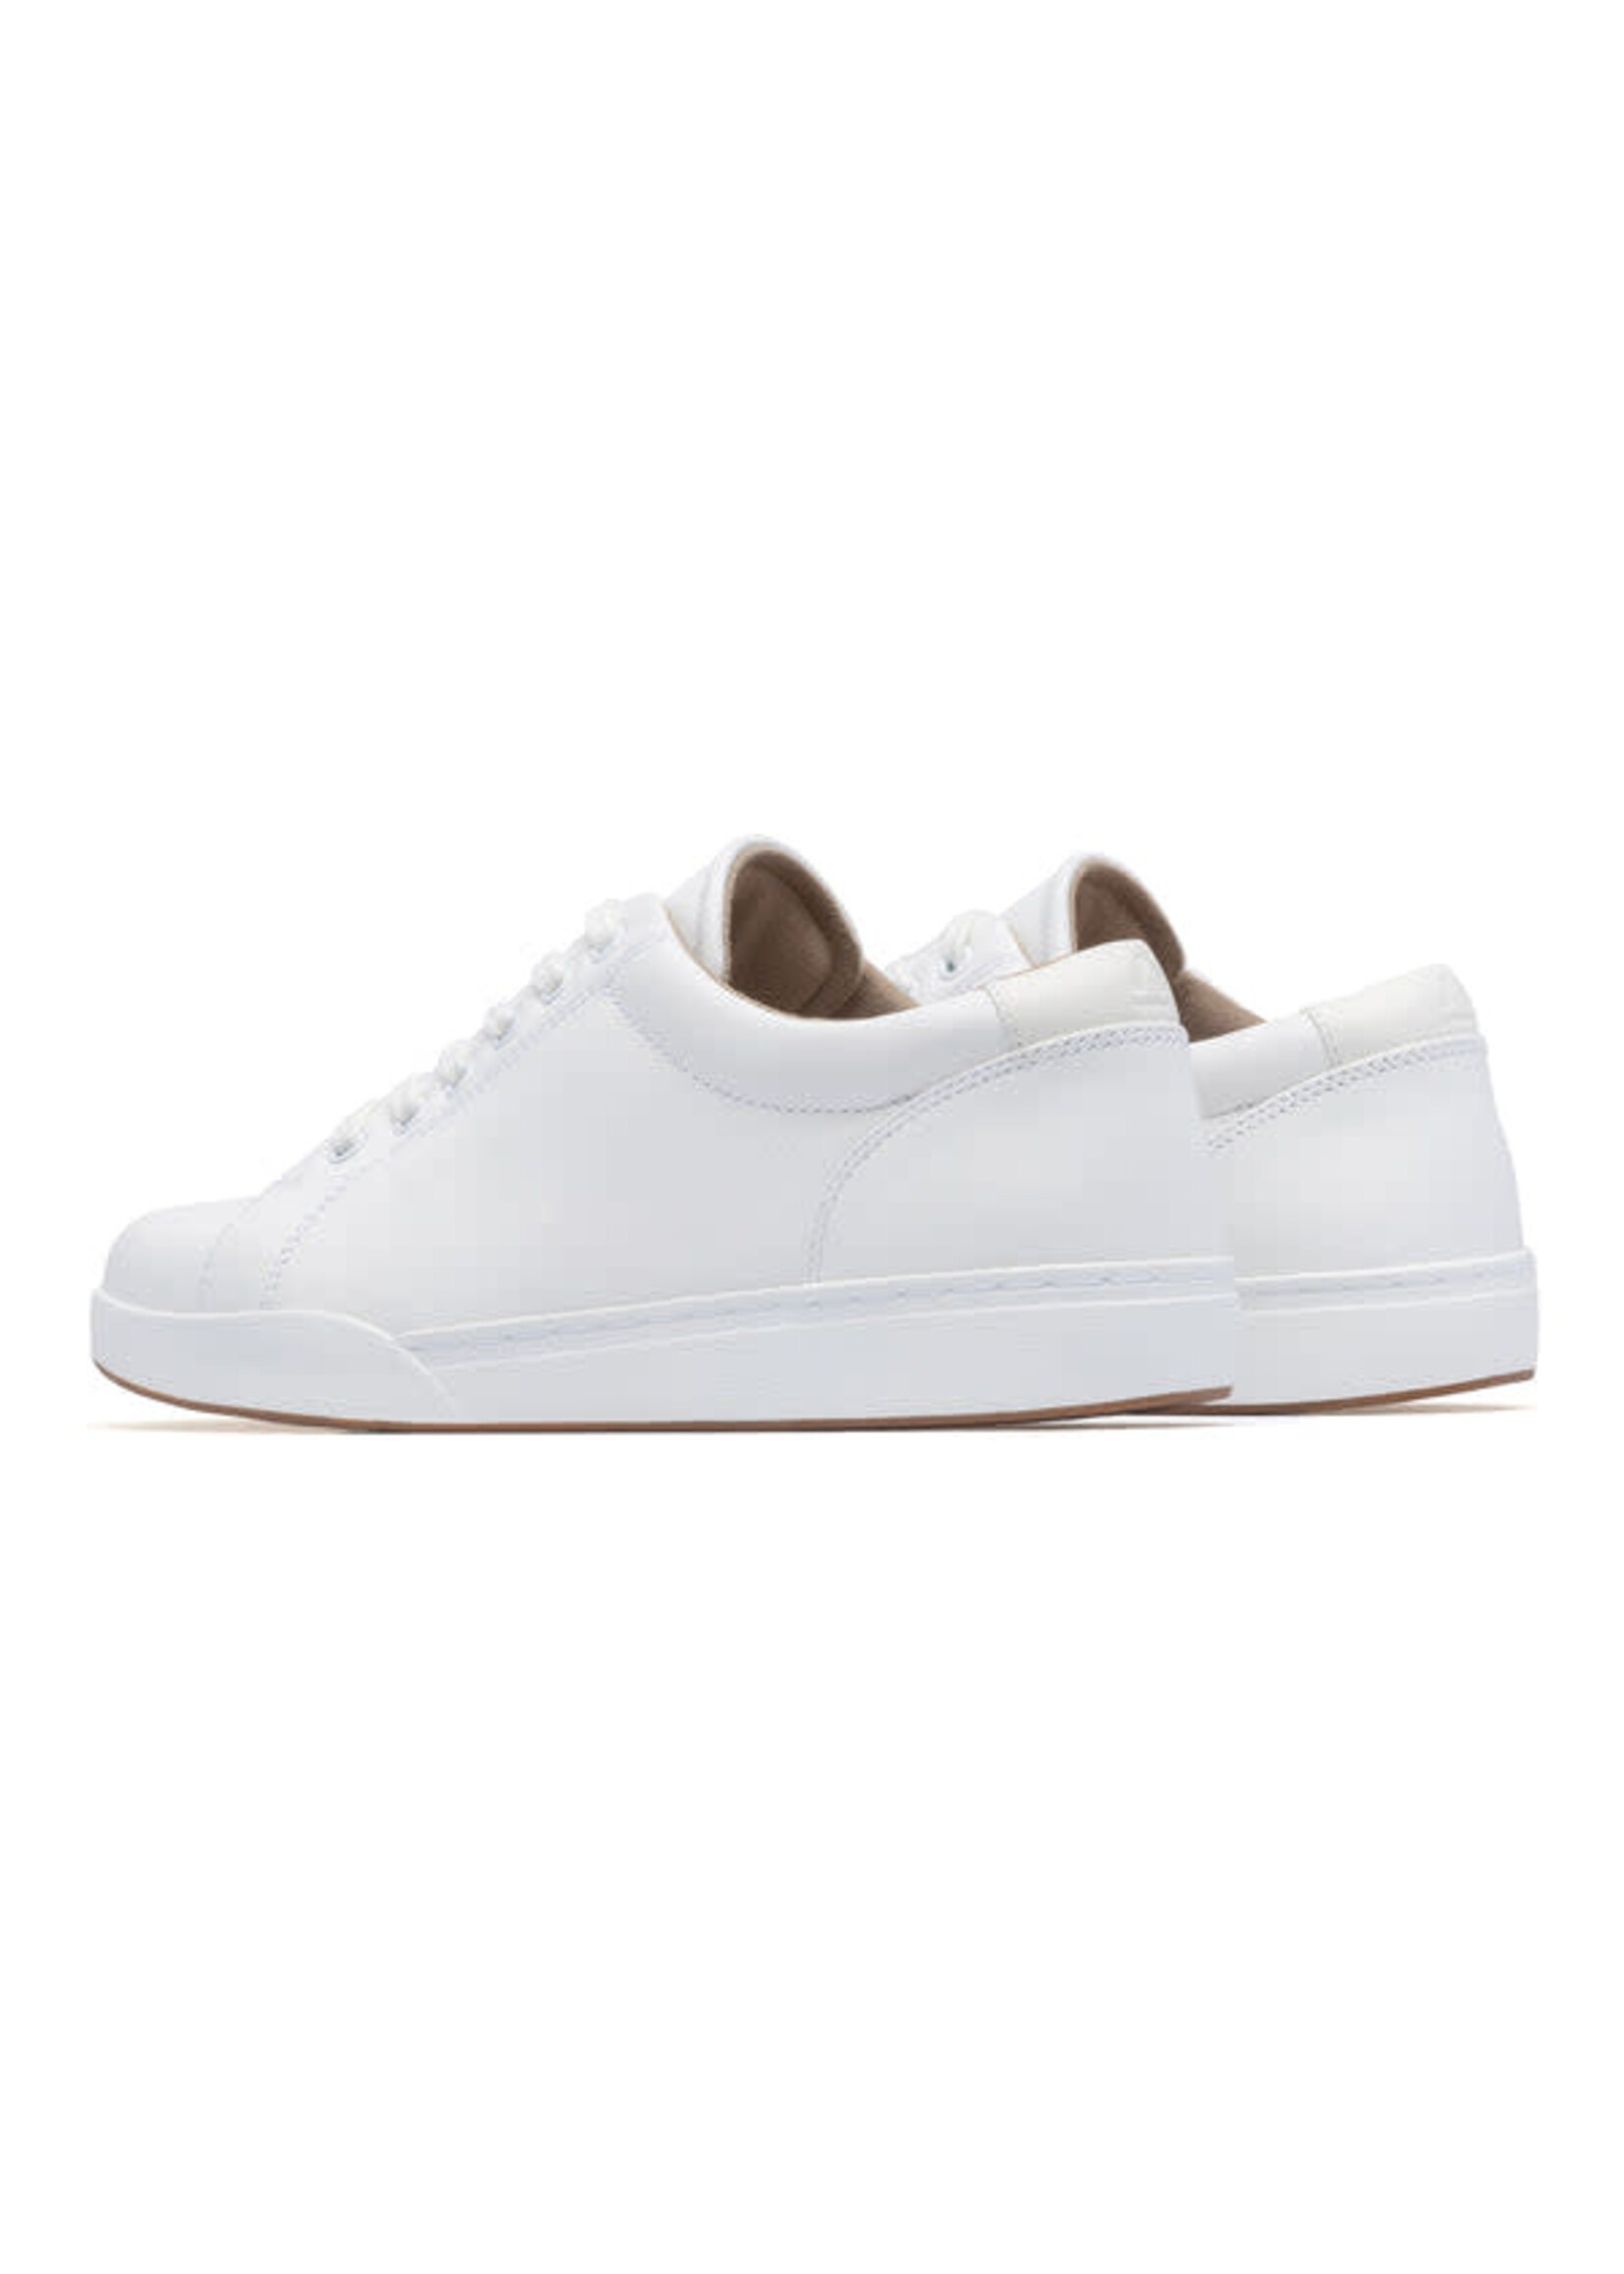 ABEO Addie White Leather Sneaker by ABEO  $99.99 Blowout